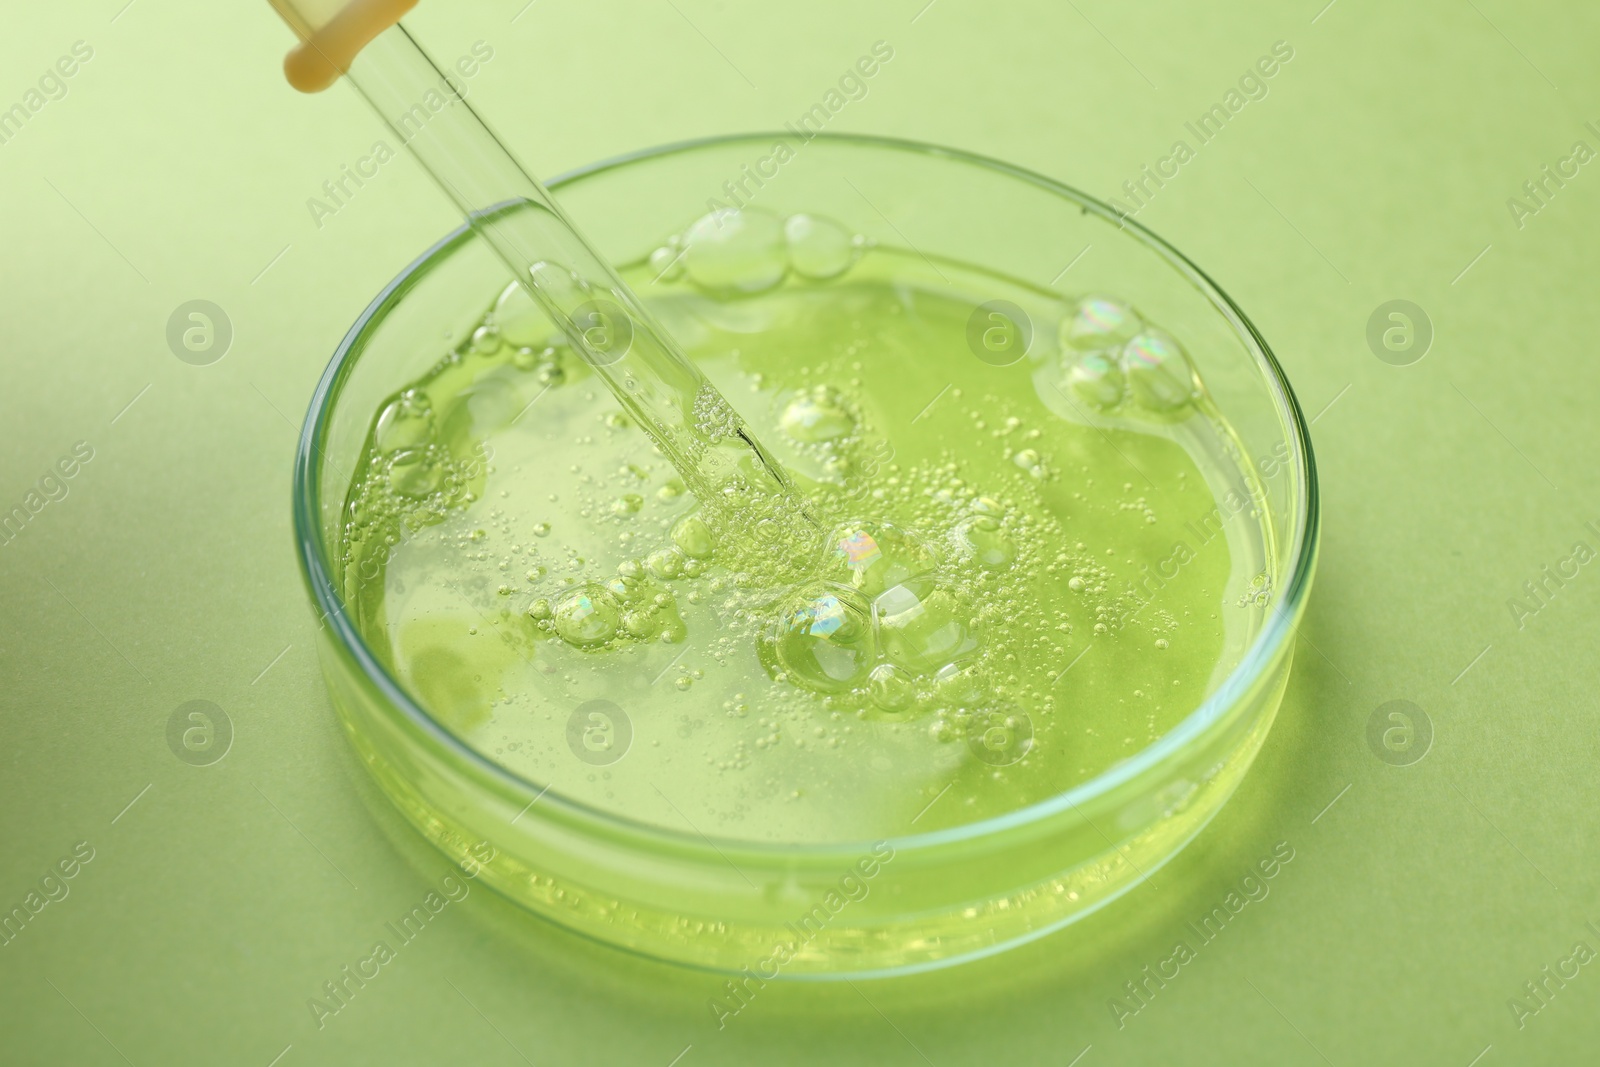 Photo of Petri dish with liquid sample and pipette on green background, closeup